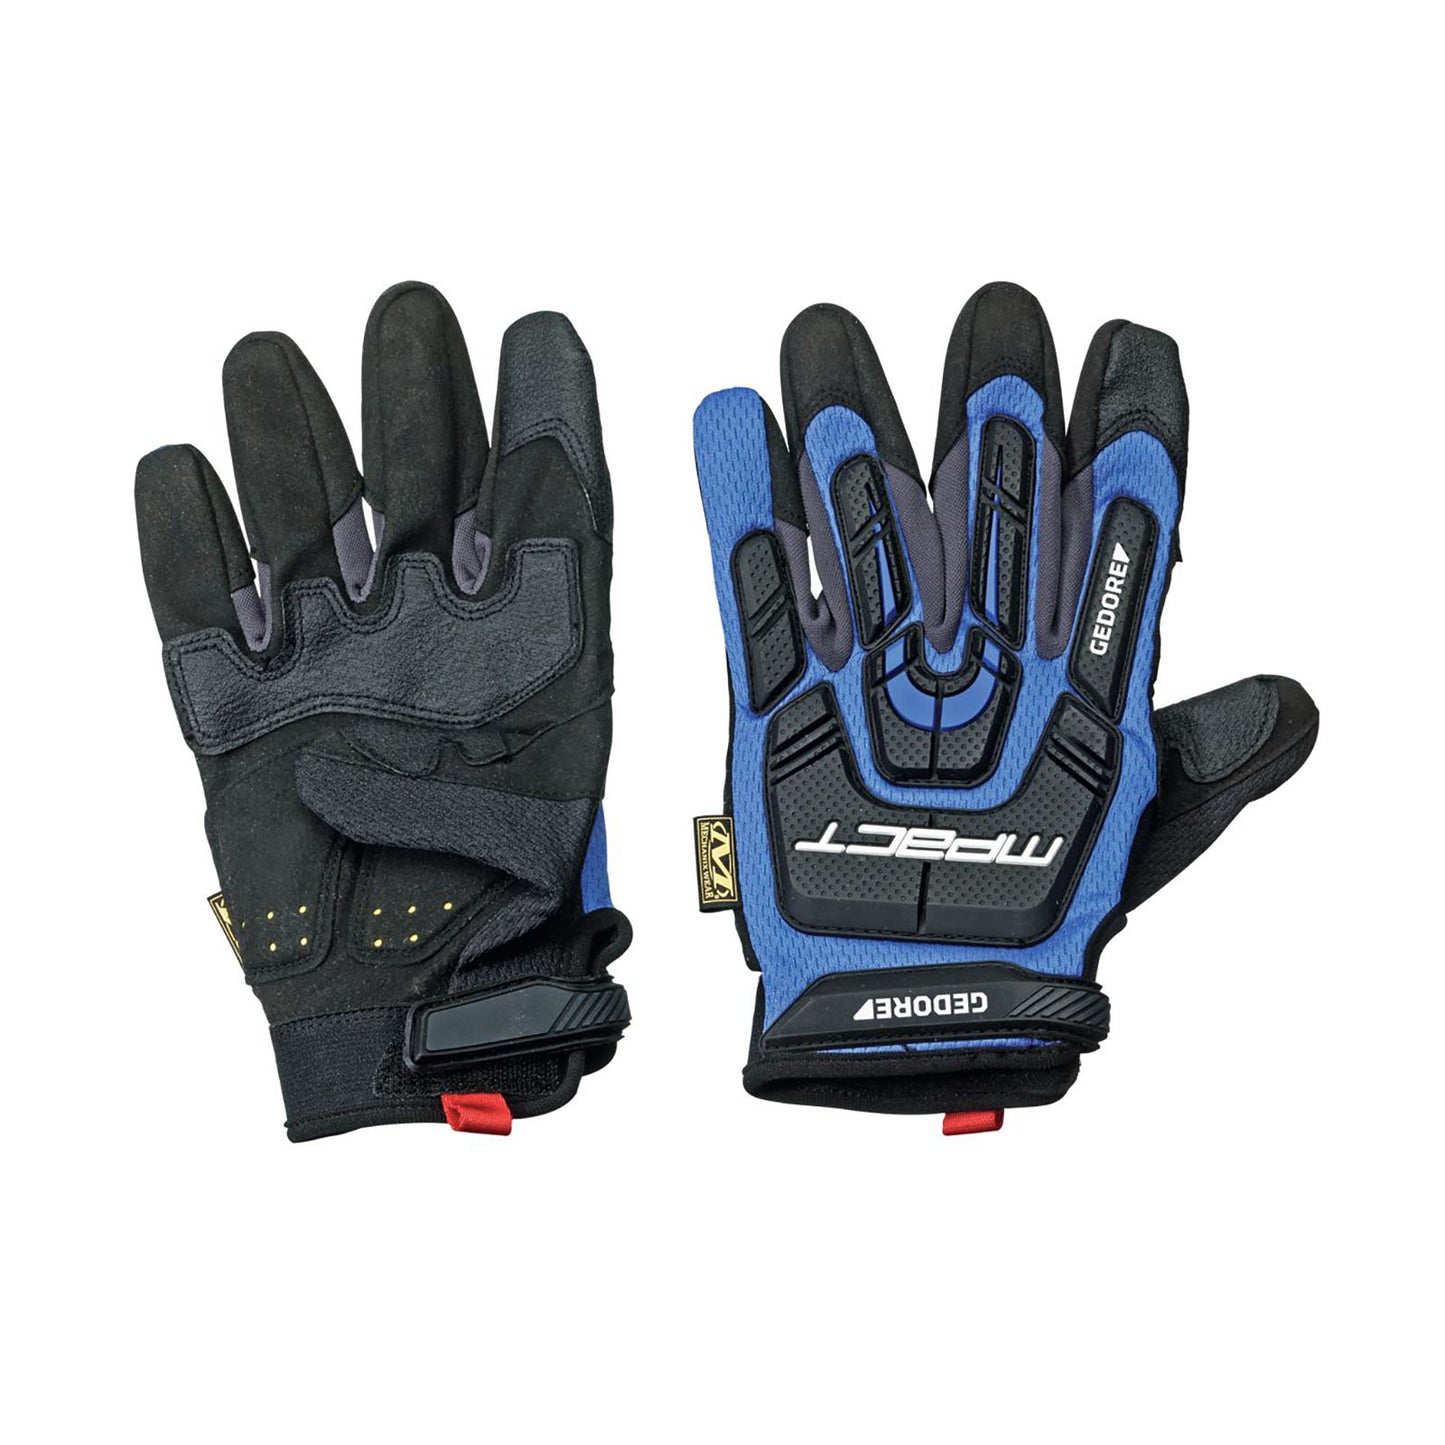 GEDORE 922 8 - Guantes M-PACT Talla S/8 (1938738)